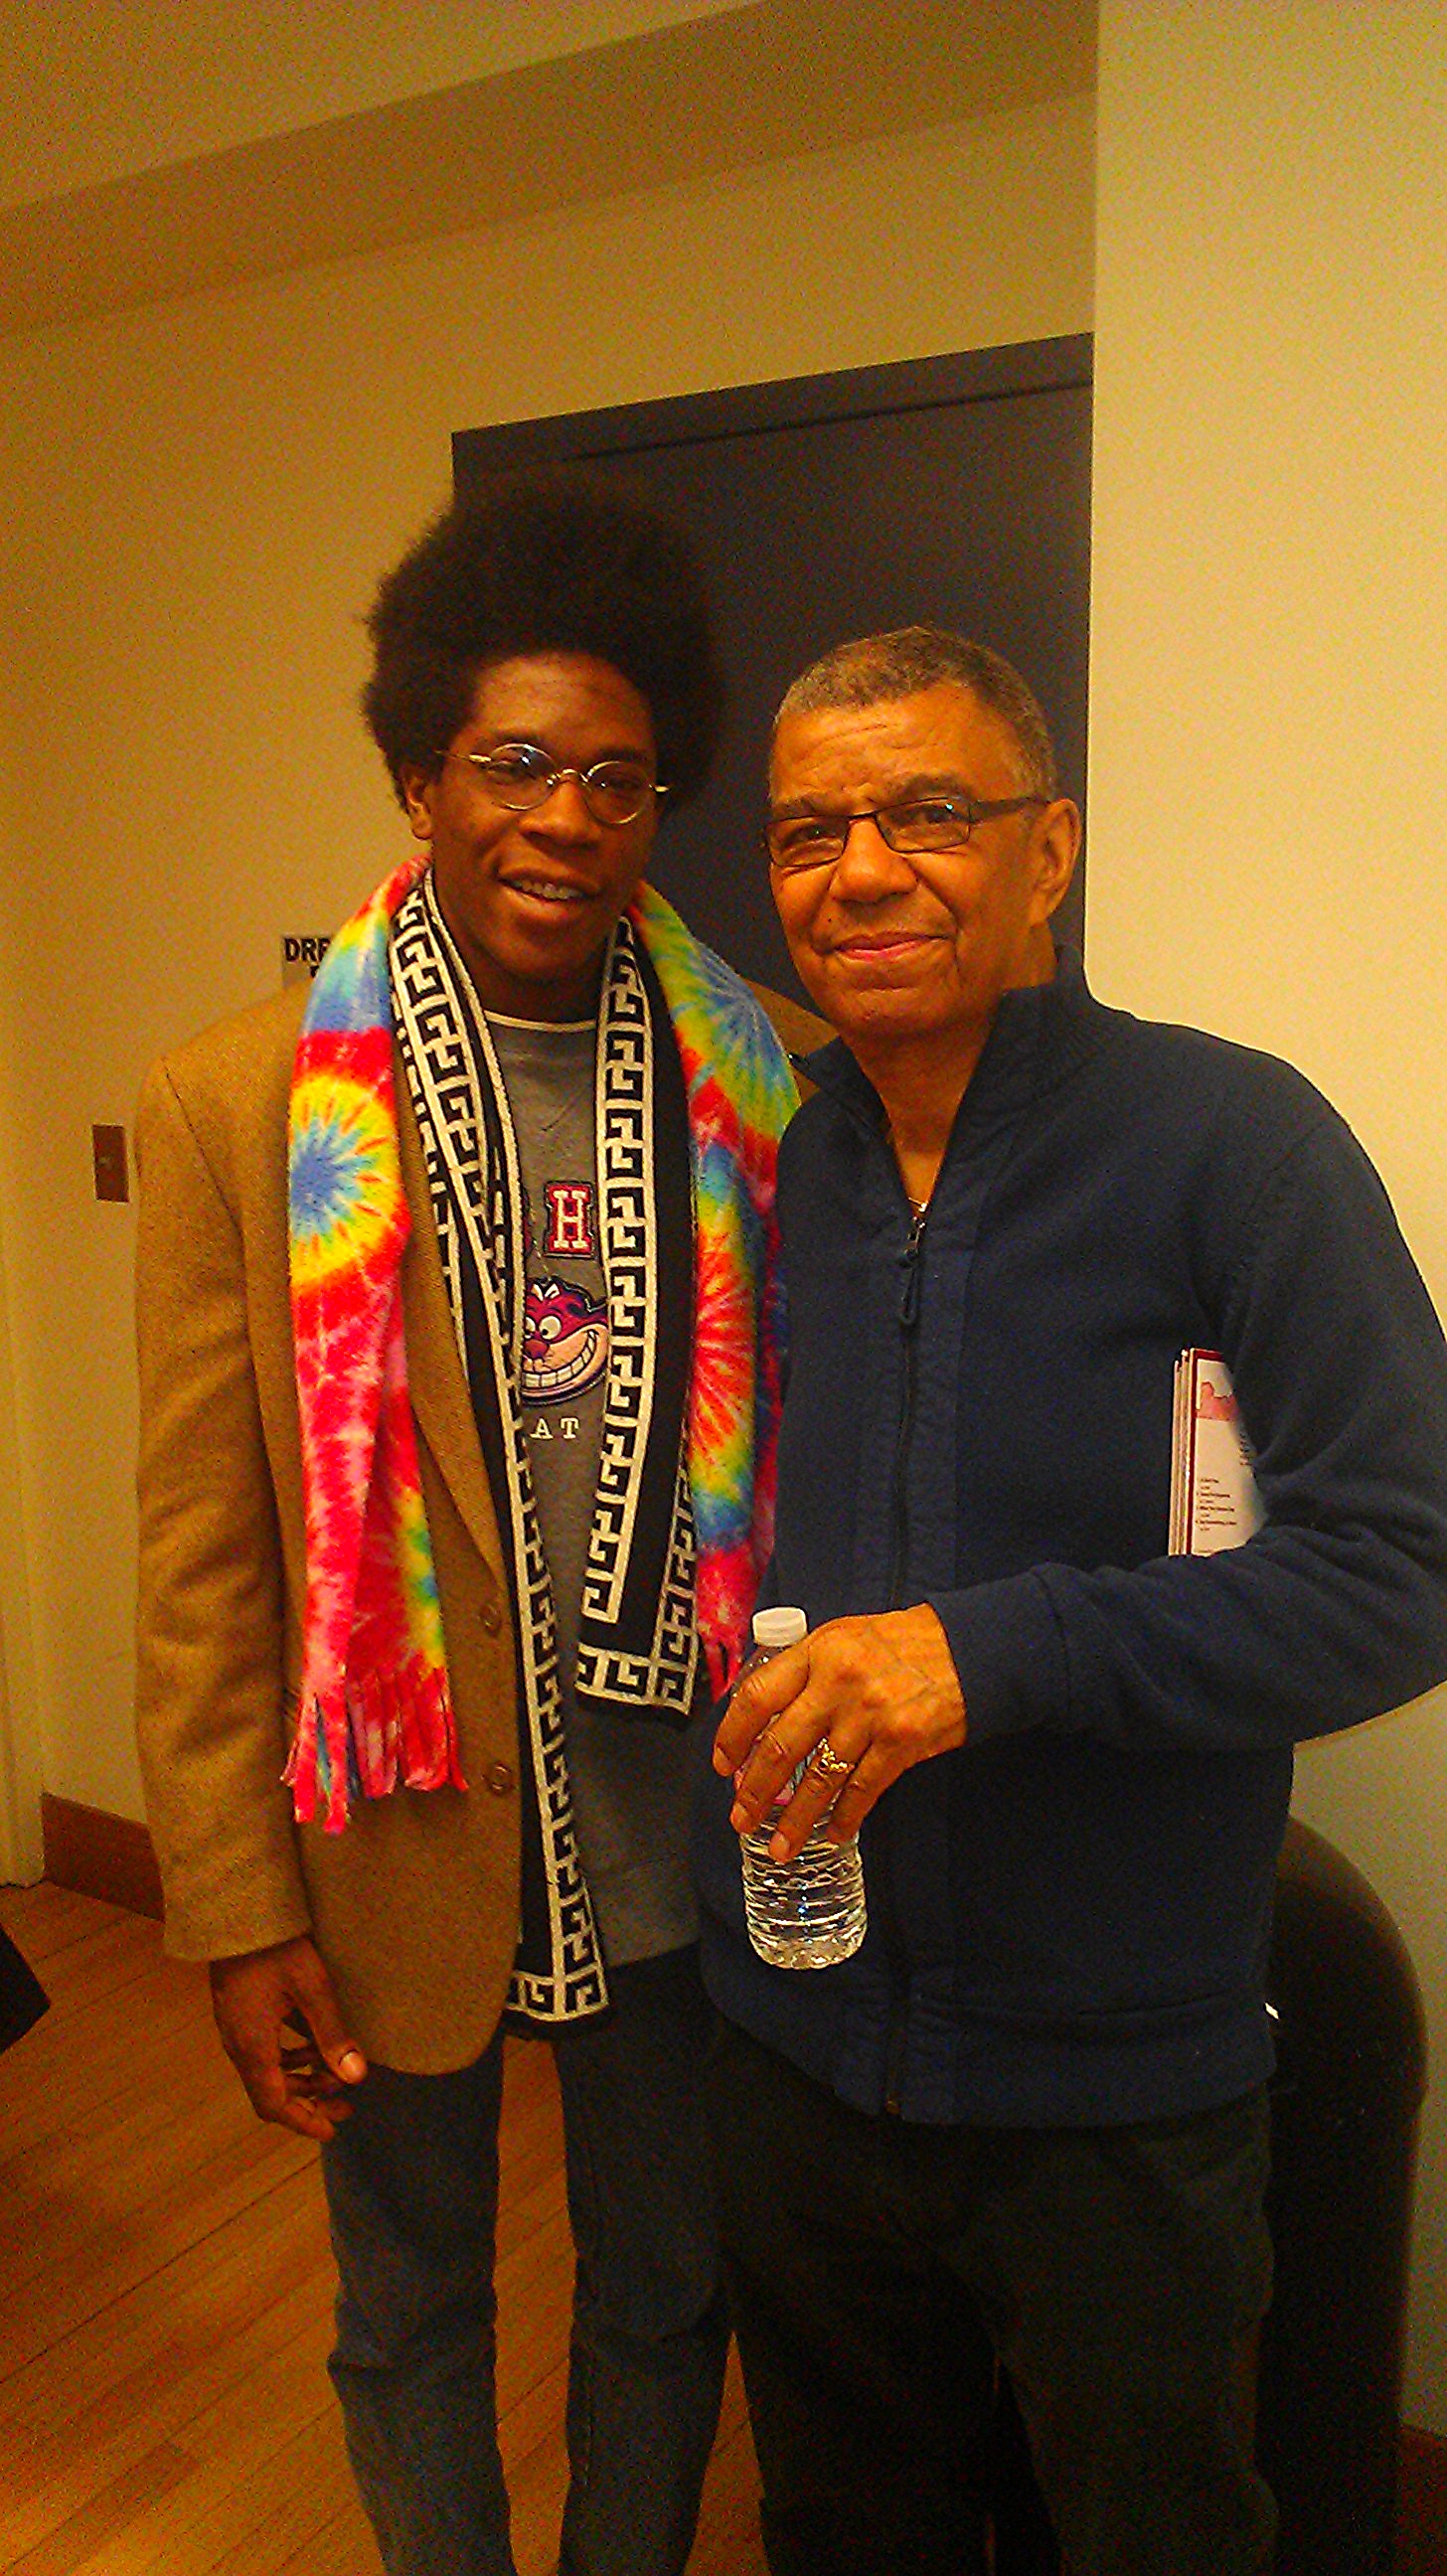 Minglin' with Jack DeJohnette after his gig with Leo Genovese, Joe Lovano, and Esperanza Spalding. 